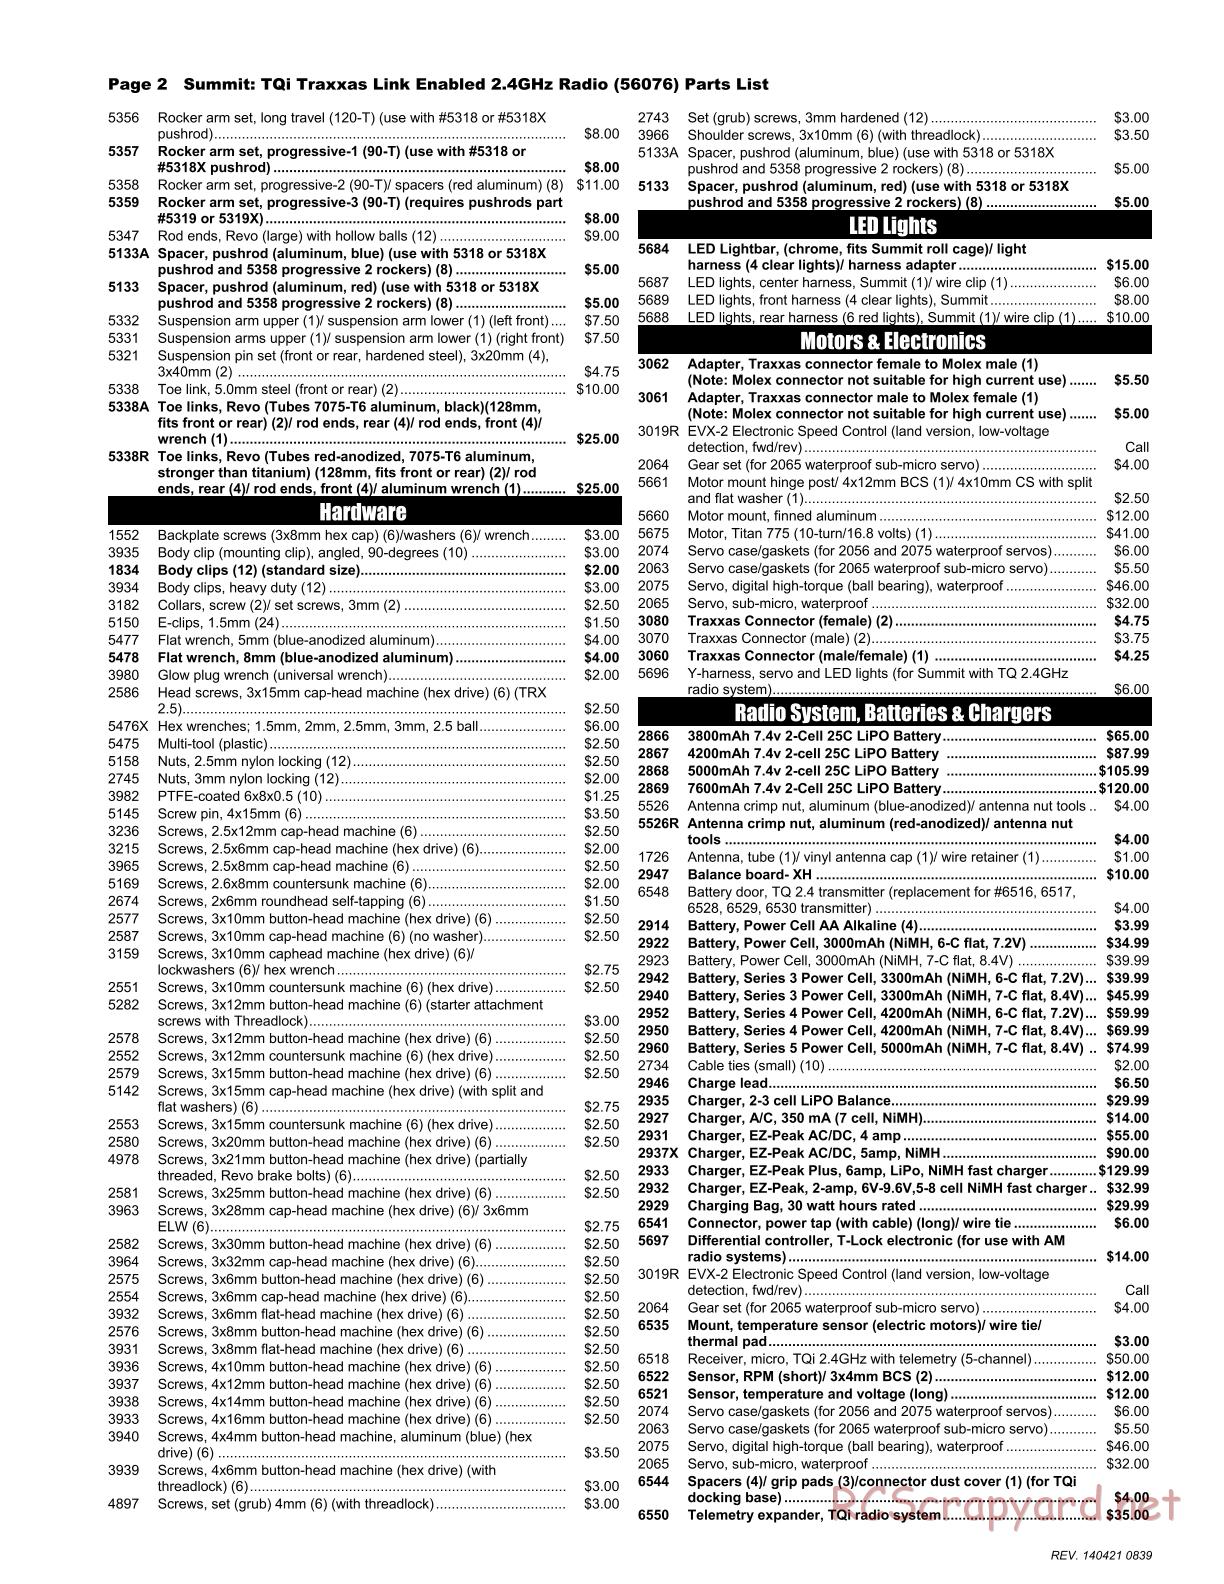 Traxxas - Summit (2014) - Parts List - Page 2